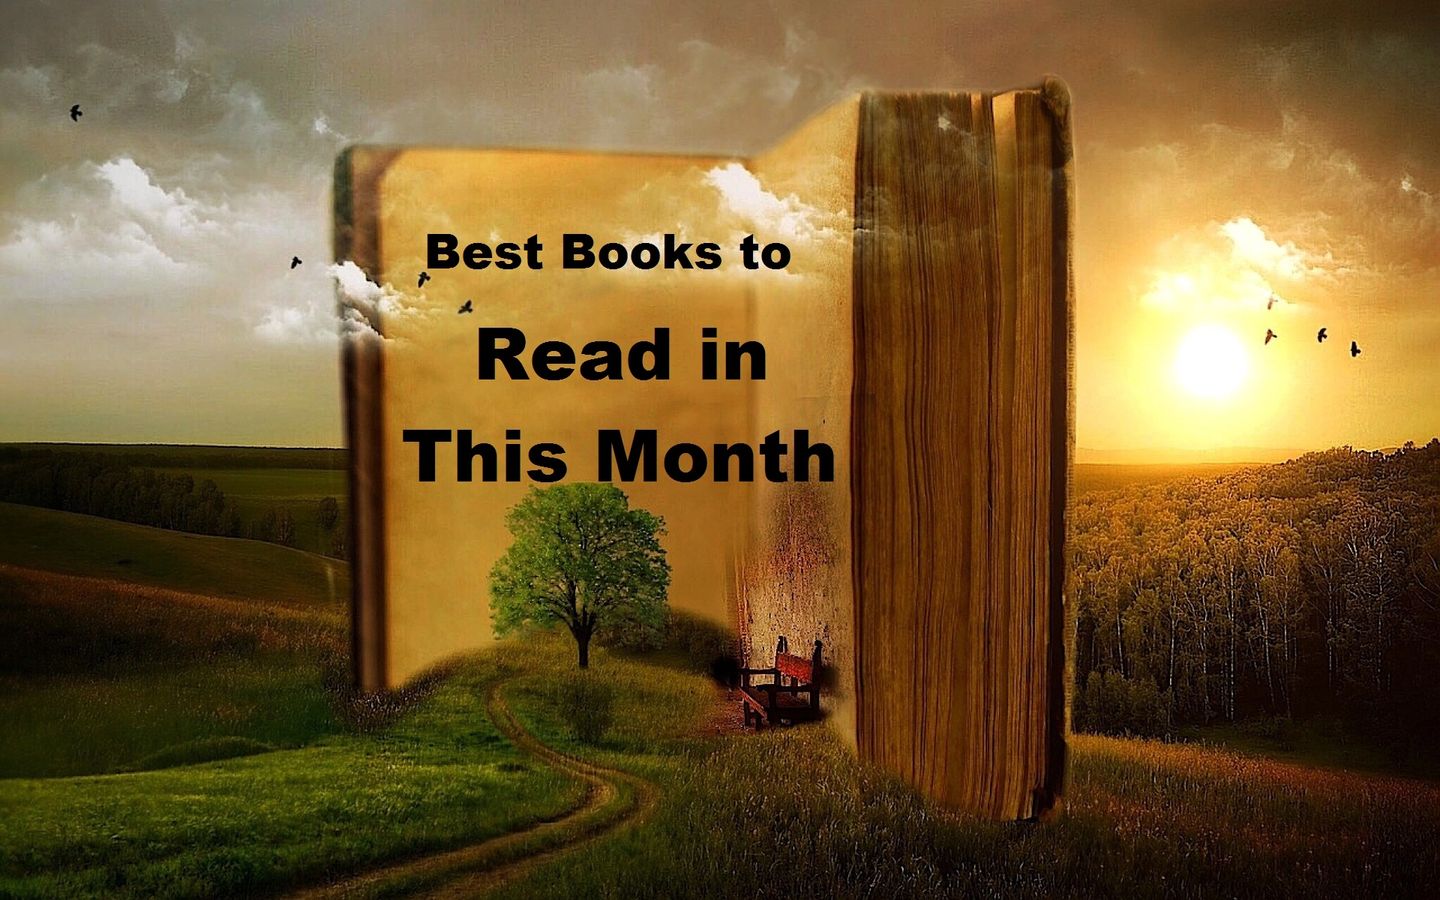 Best Books to Read in this Month